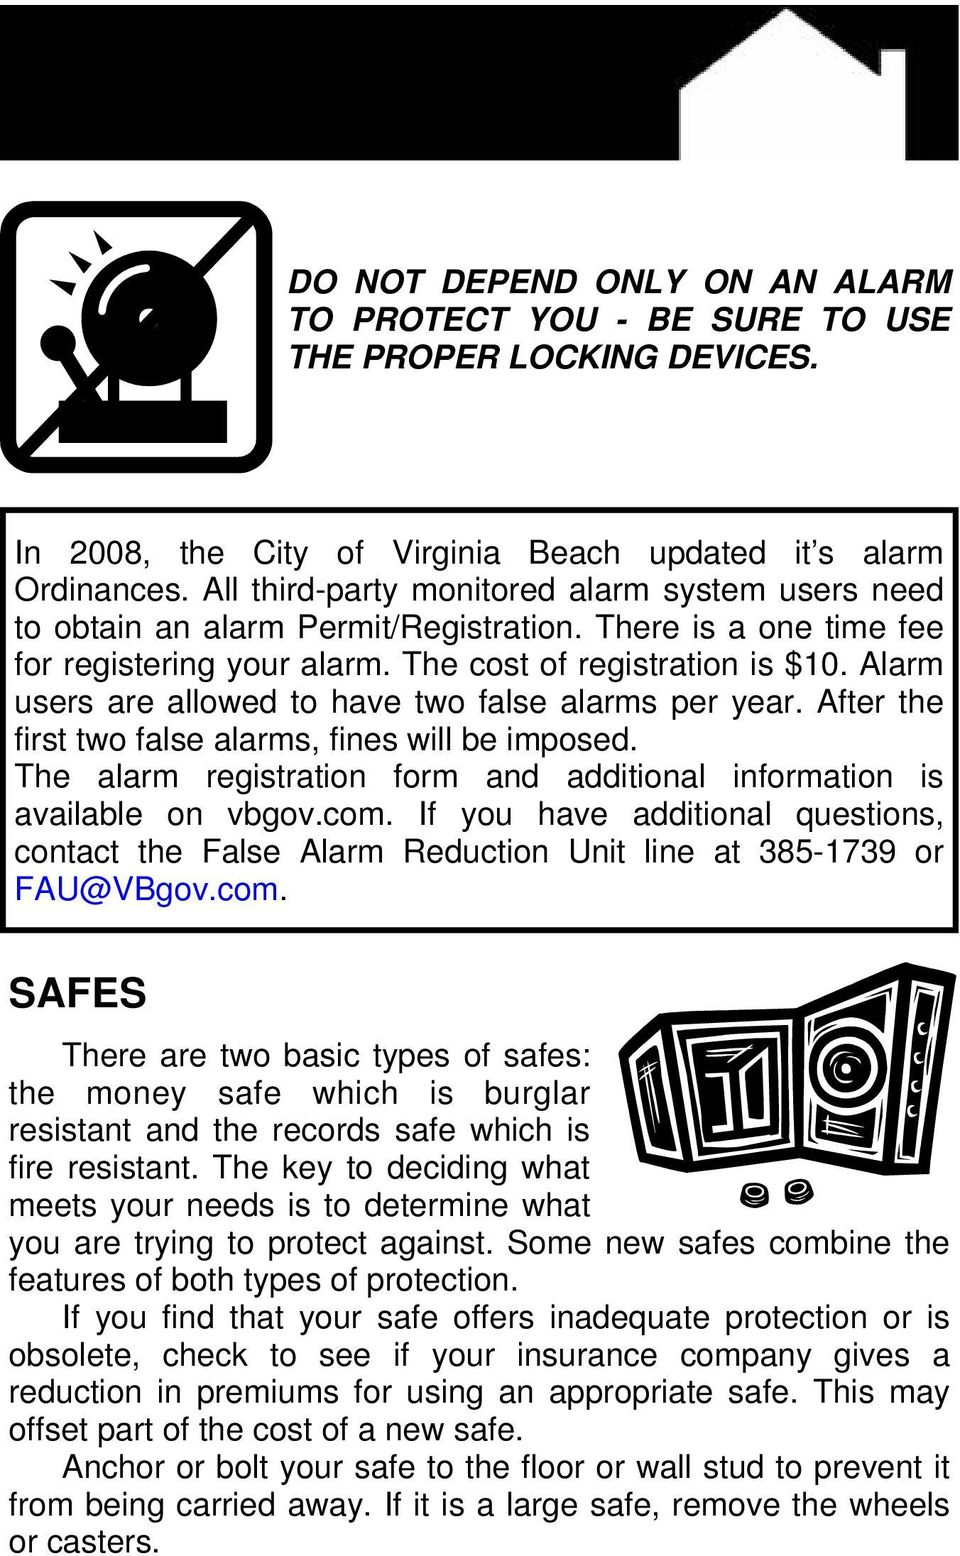 Alarm users are allowed to have two false alarms per year. After the first two false alarms, fines will be imposed. The alarm registration form and additional information is available on vbgov.com.